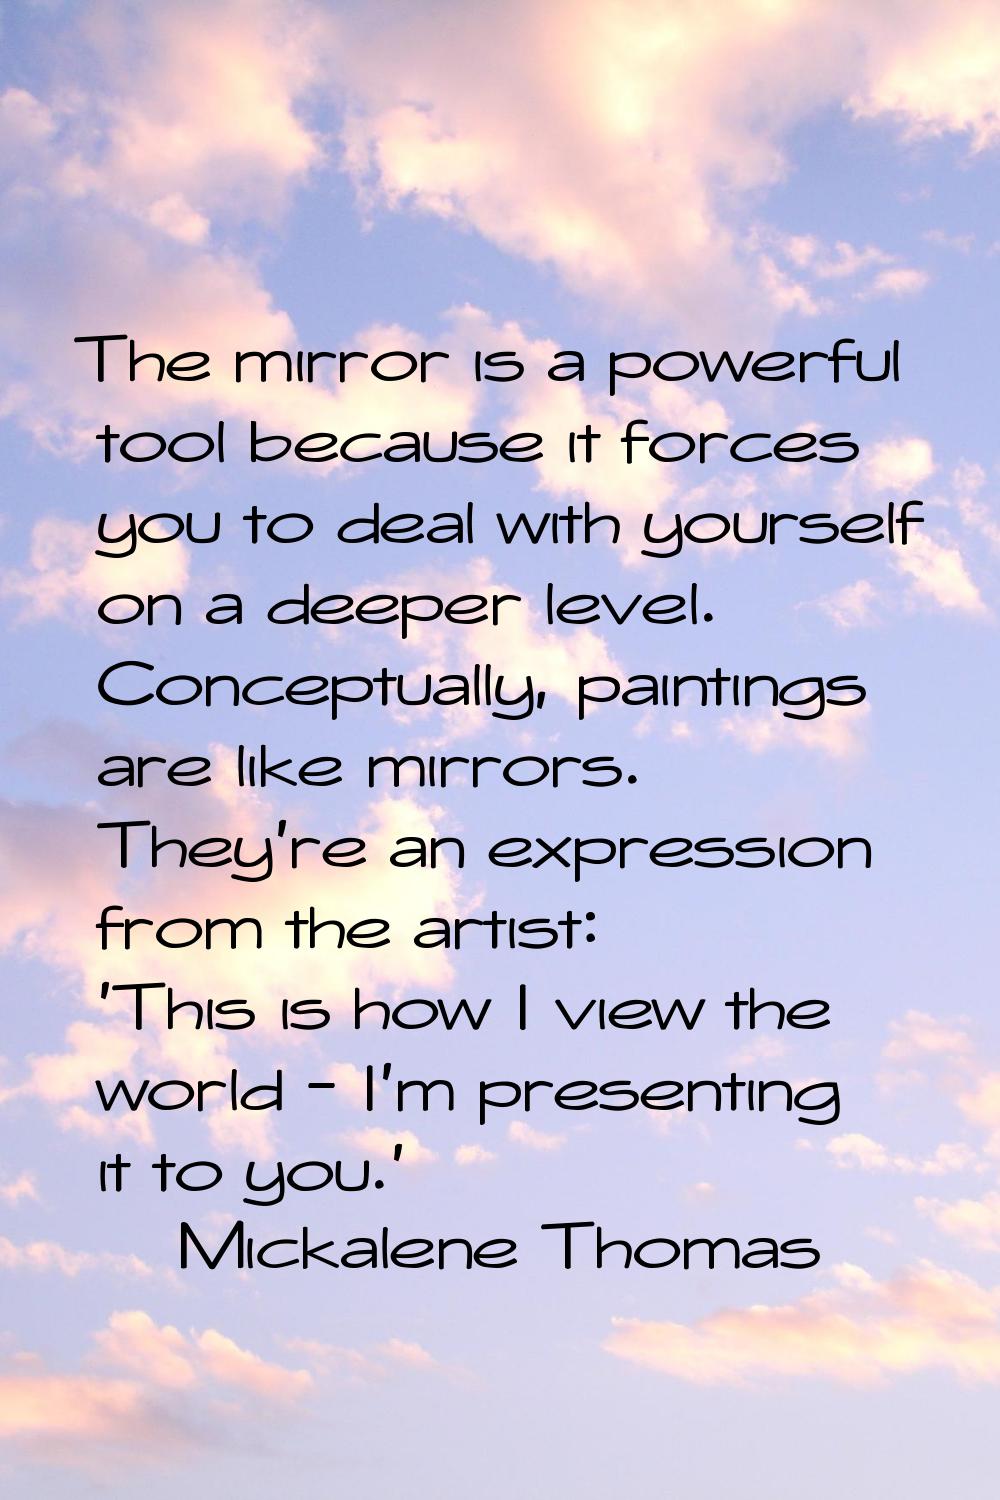 The mirror is a powerful tool because it forces you to deal with yourself on a deeper level. Concep